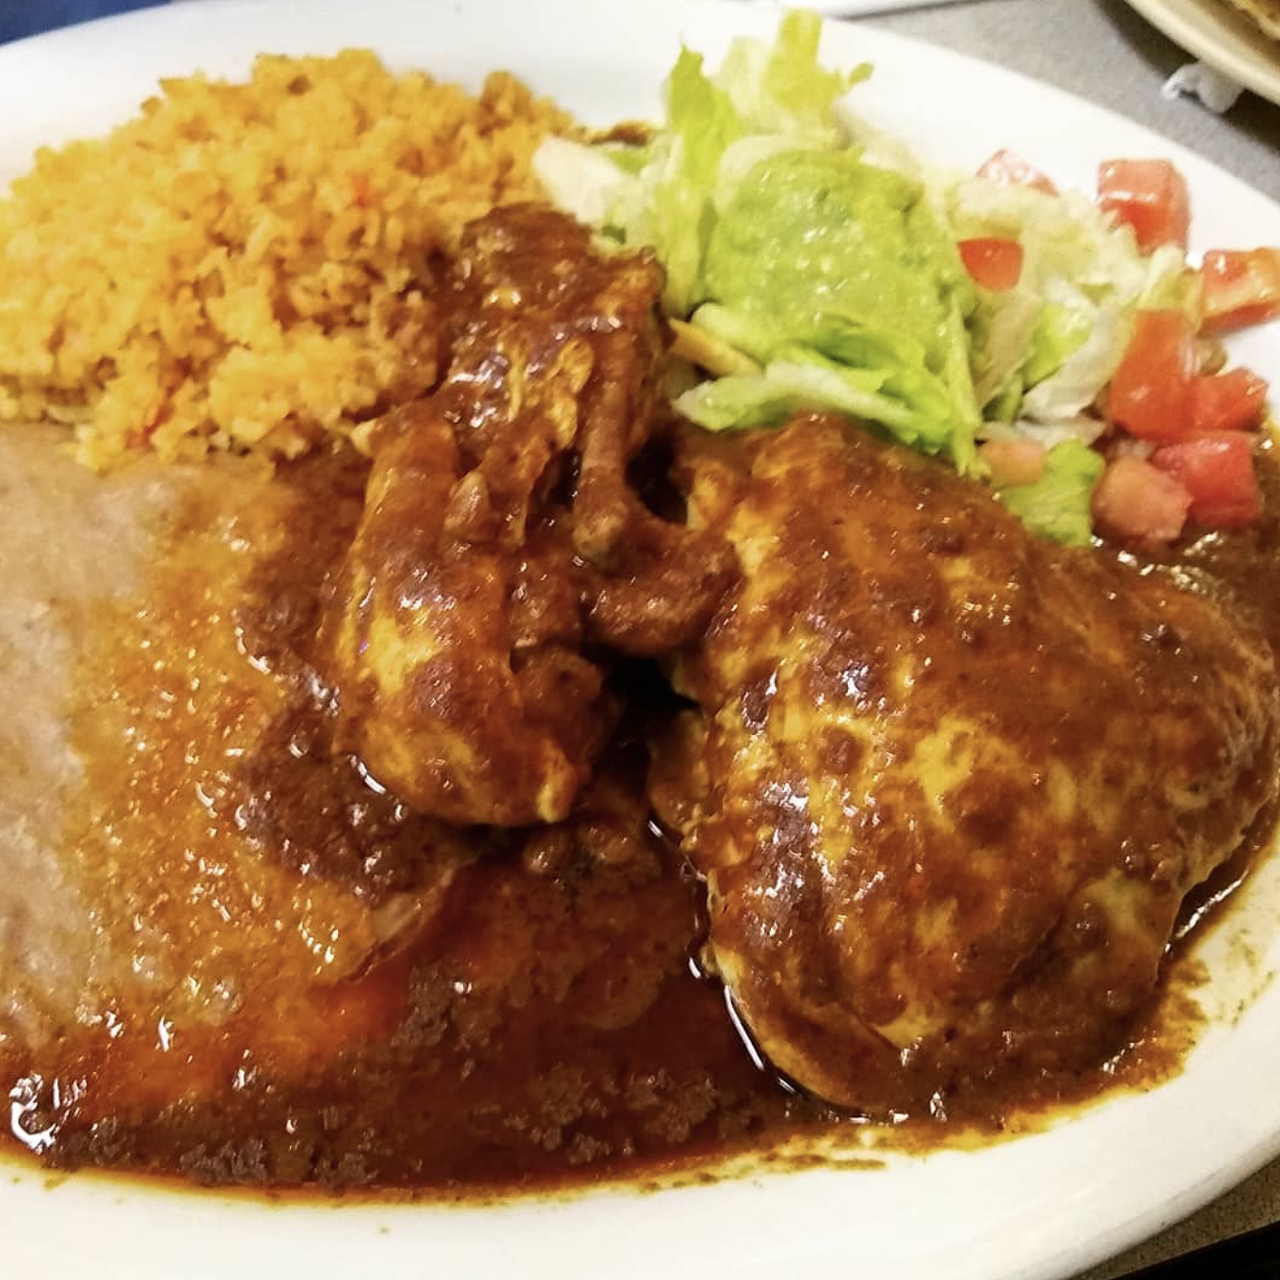 Los Ajos Mexican Grill
7616 Culebra Rd STE 109, (210) 647-7020, losajosgrill.com
Yelper Kimberly S. Raves about the “very quick service, very nice cashier and server,” and says Los Ajos’ food is “Pretty darn good!” Just a heads up: it’s a small place, so don’t be surprised if you have to wait for a table. 
Photo via Instagram /  tothedish